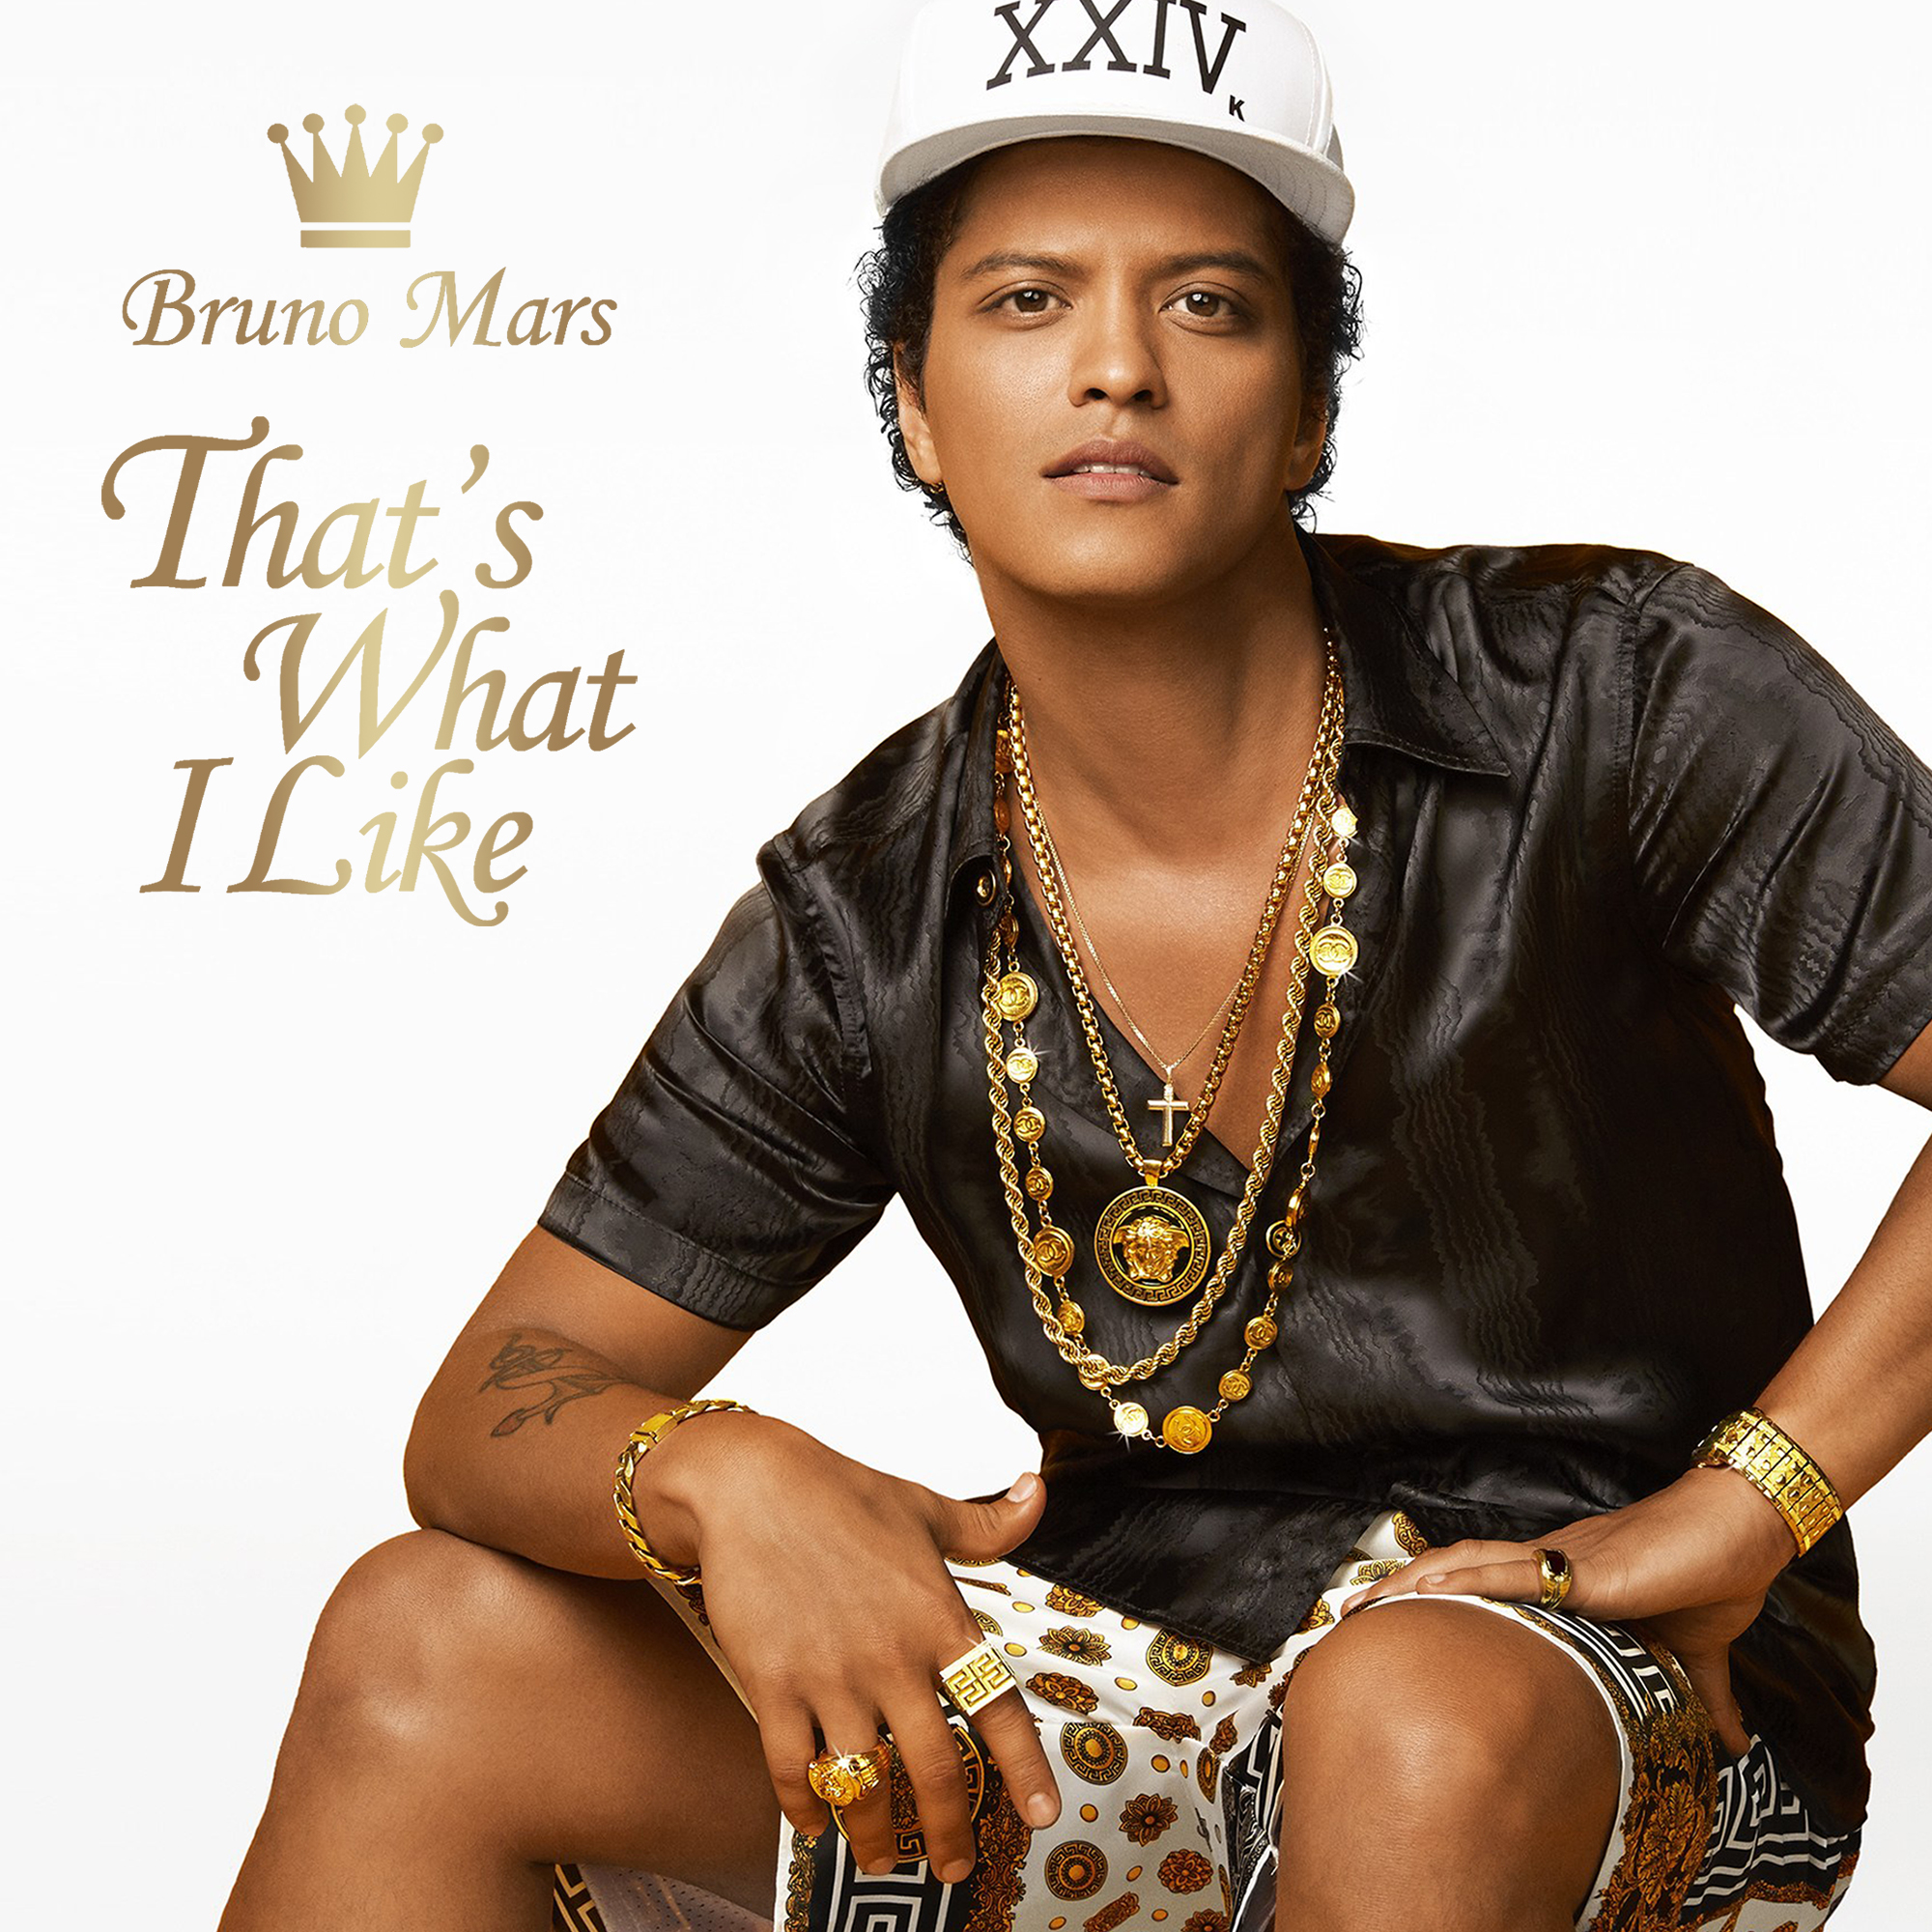 Check Out Bruno Mar’s Music Video for “That’s What I Like”! | KCHZ-FM